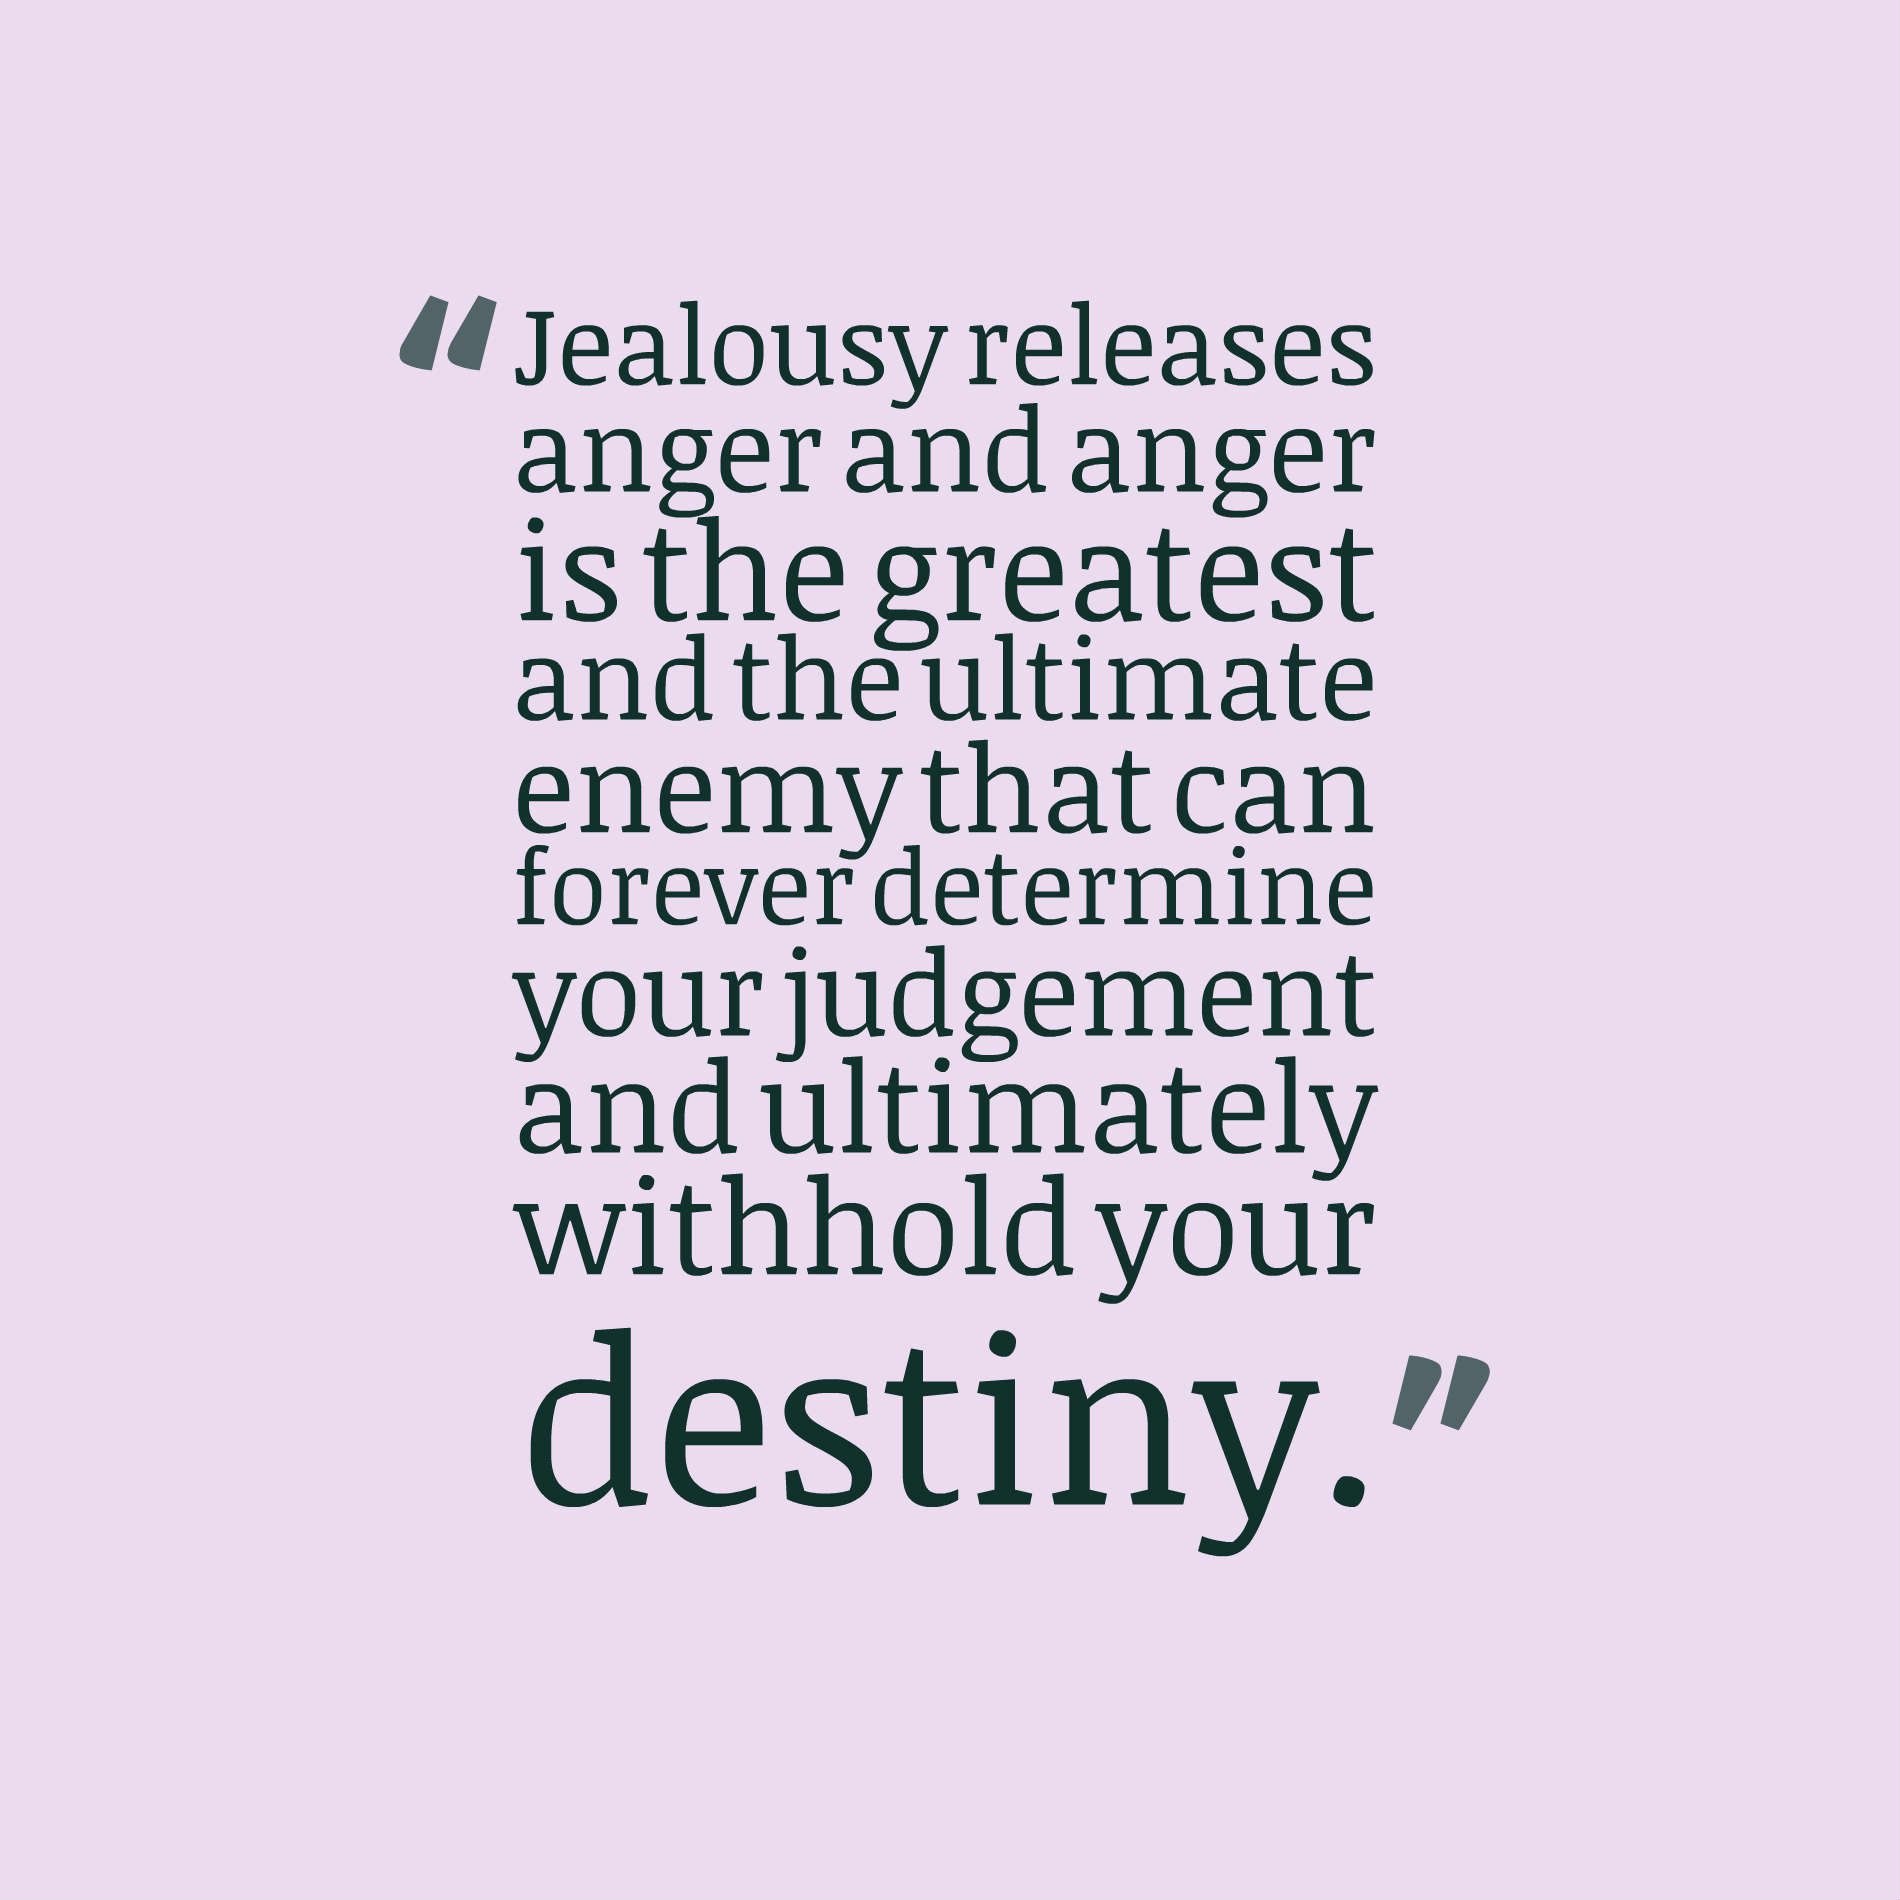 Jealousy releases anger and anger is the greatest and the ultimate enemy that can forever determine your judgement and ultimately withhold your destiny.